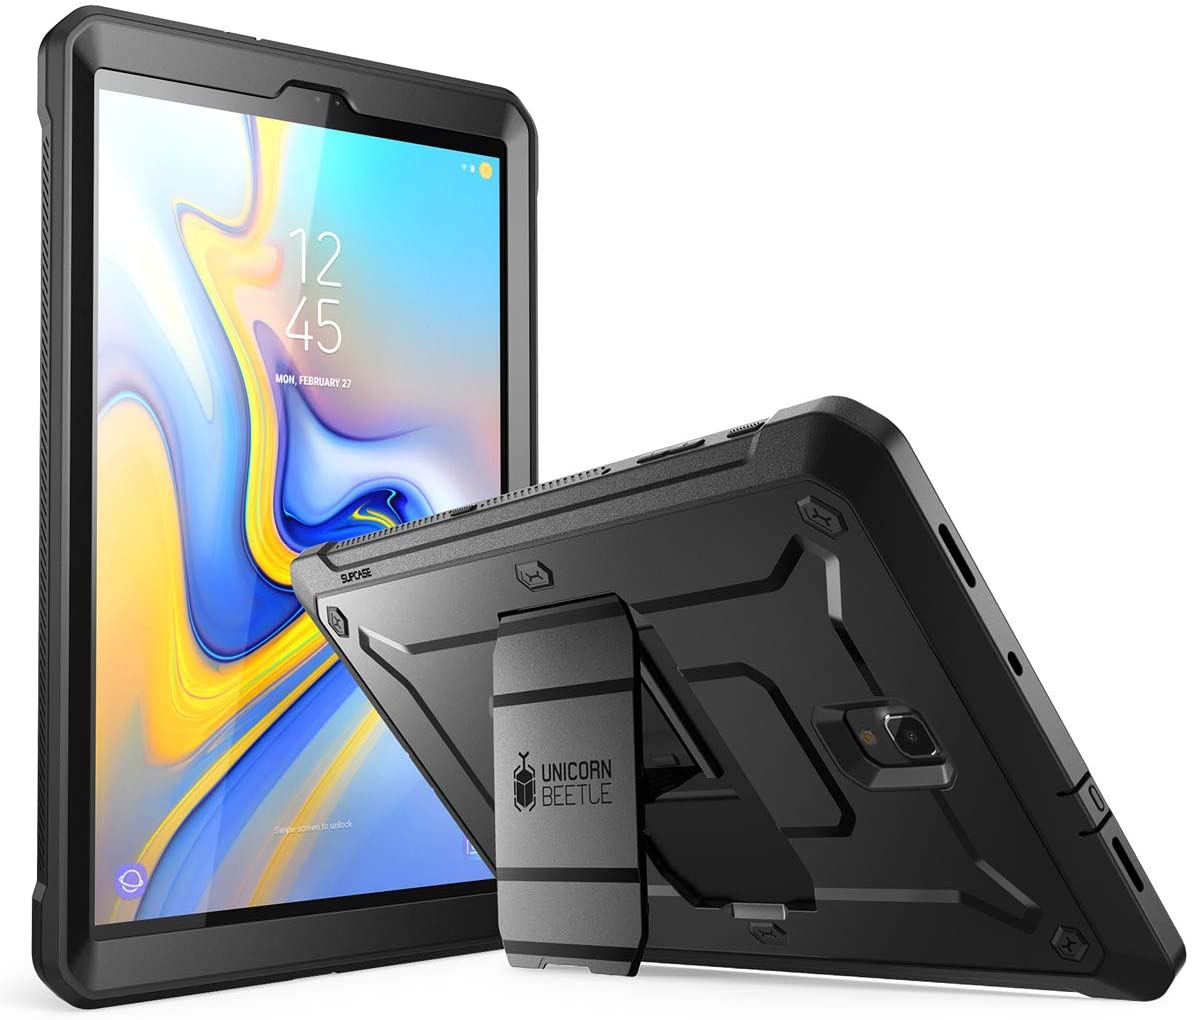 Galaxy Tab A 10.5 Case, SUPCASE Full-Body Rugged with Built-in Screen Protector Kickstand Hybrid Case for Samsung Galaxy Tab A 10.5 inch 2018 Release - e4cents